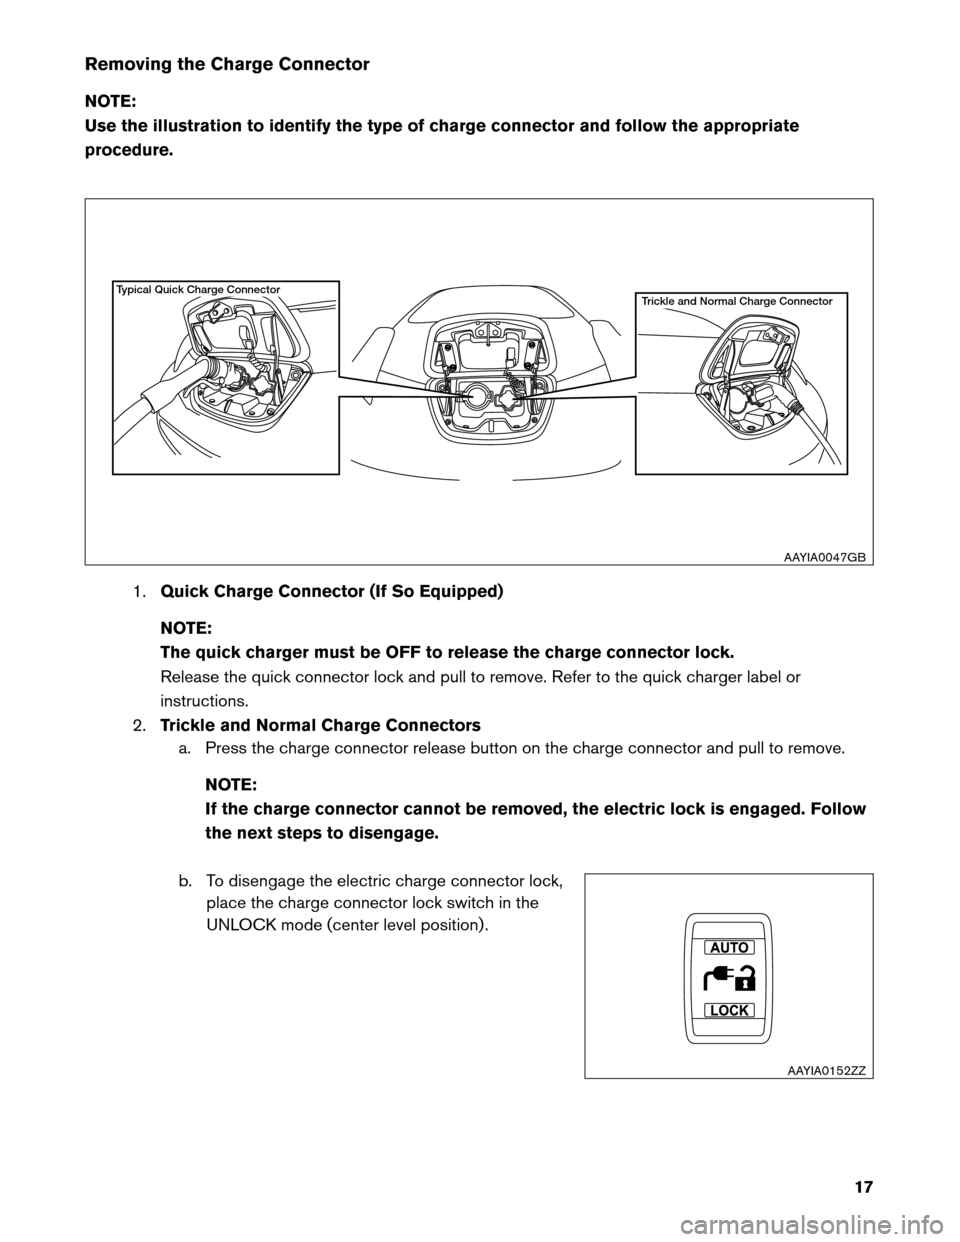 NISSAN LEAF 2013 1.G First Responders Guide Removing the Charge Connector
NO
TE:
Use the illustration to identify the type of charge connector and follow the appropriate
procedure.
1.Quick Charge Connector (If So Equipped)
NOTE:
The quick charg